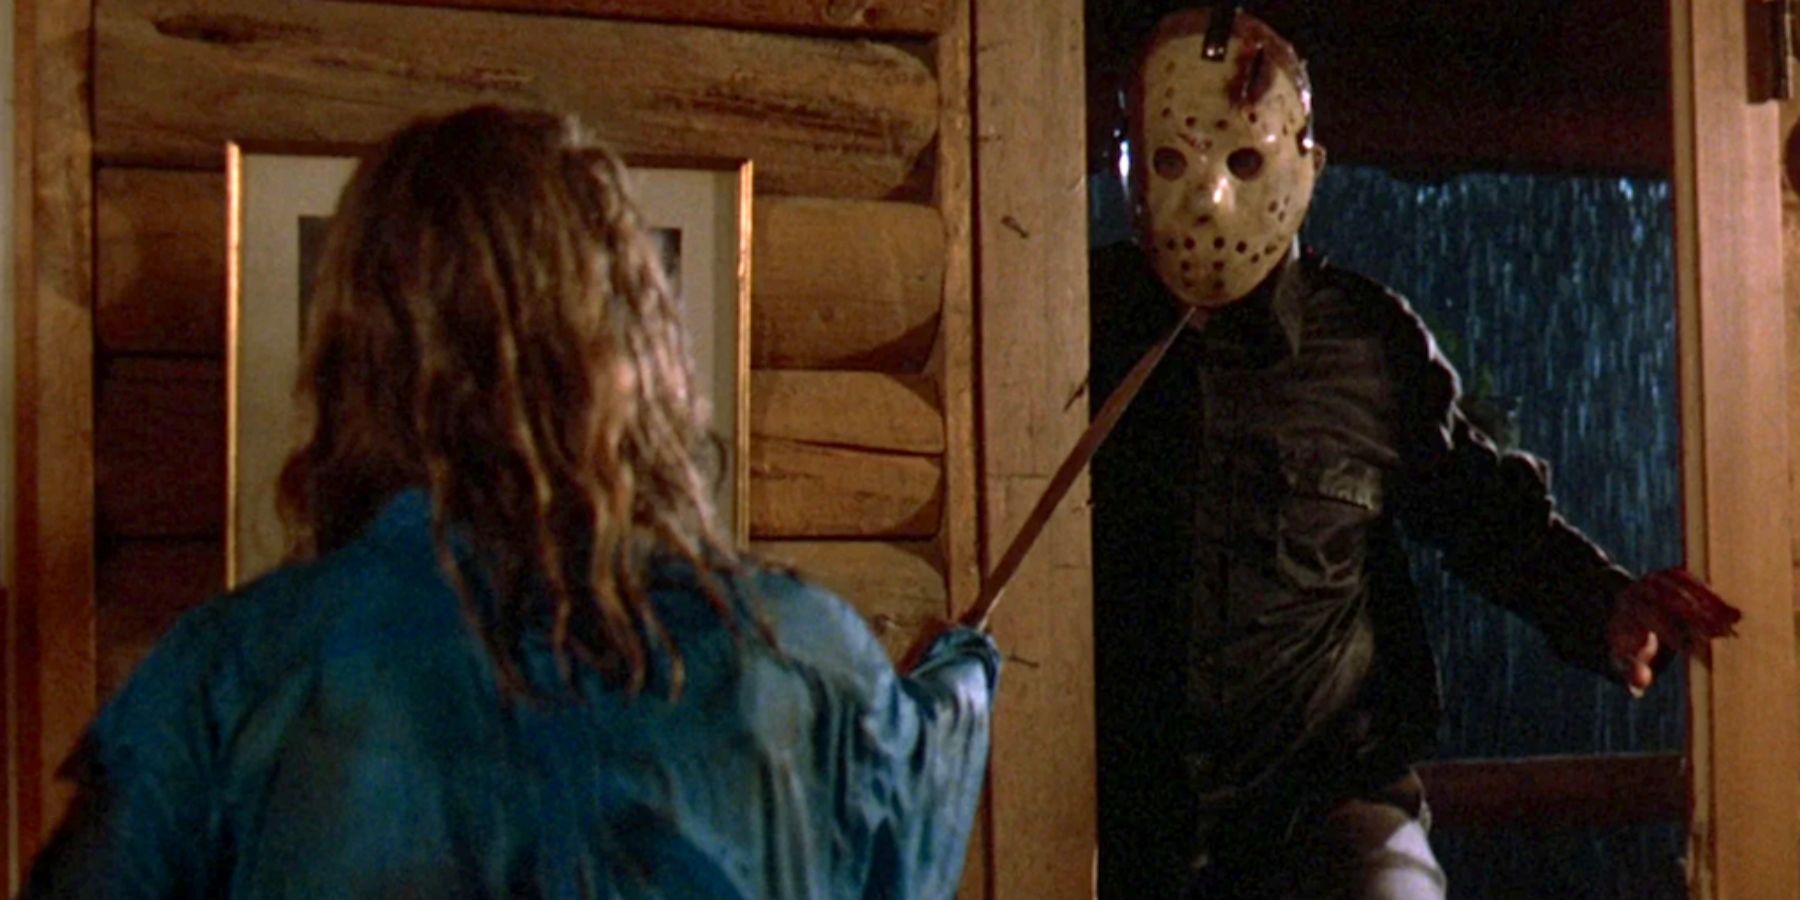 A counselor and Jason Voorhees in a cabin in Friday The 13th: The Final Chapter